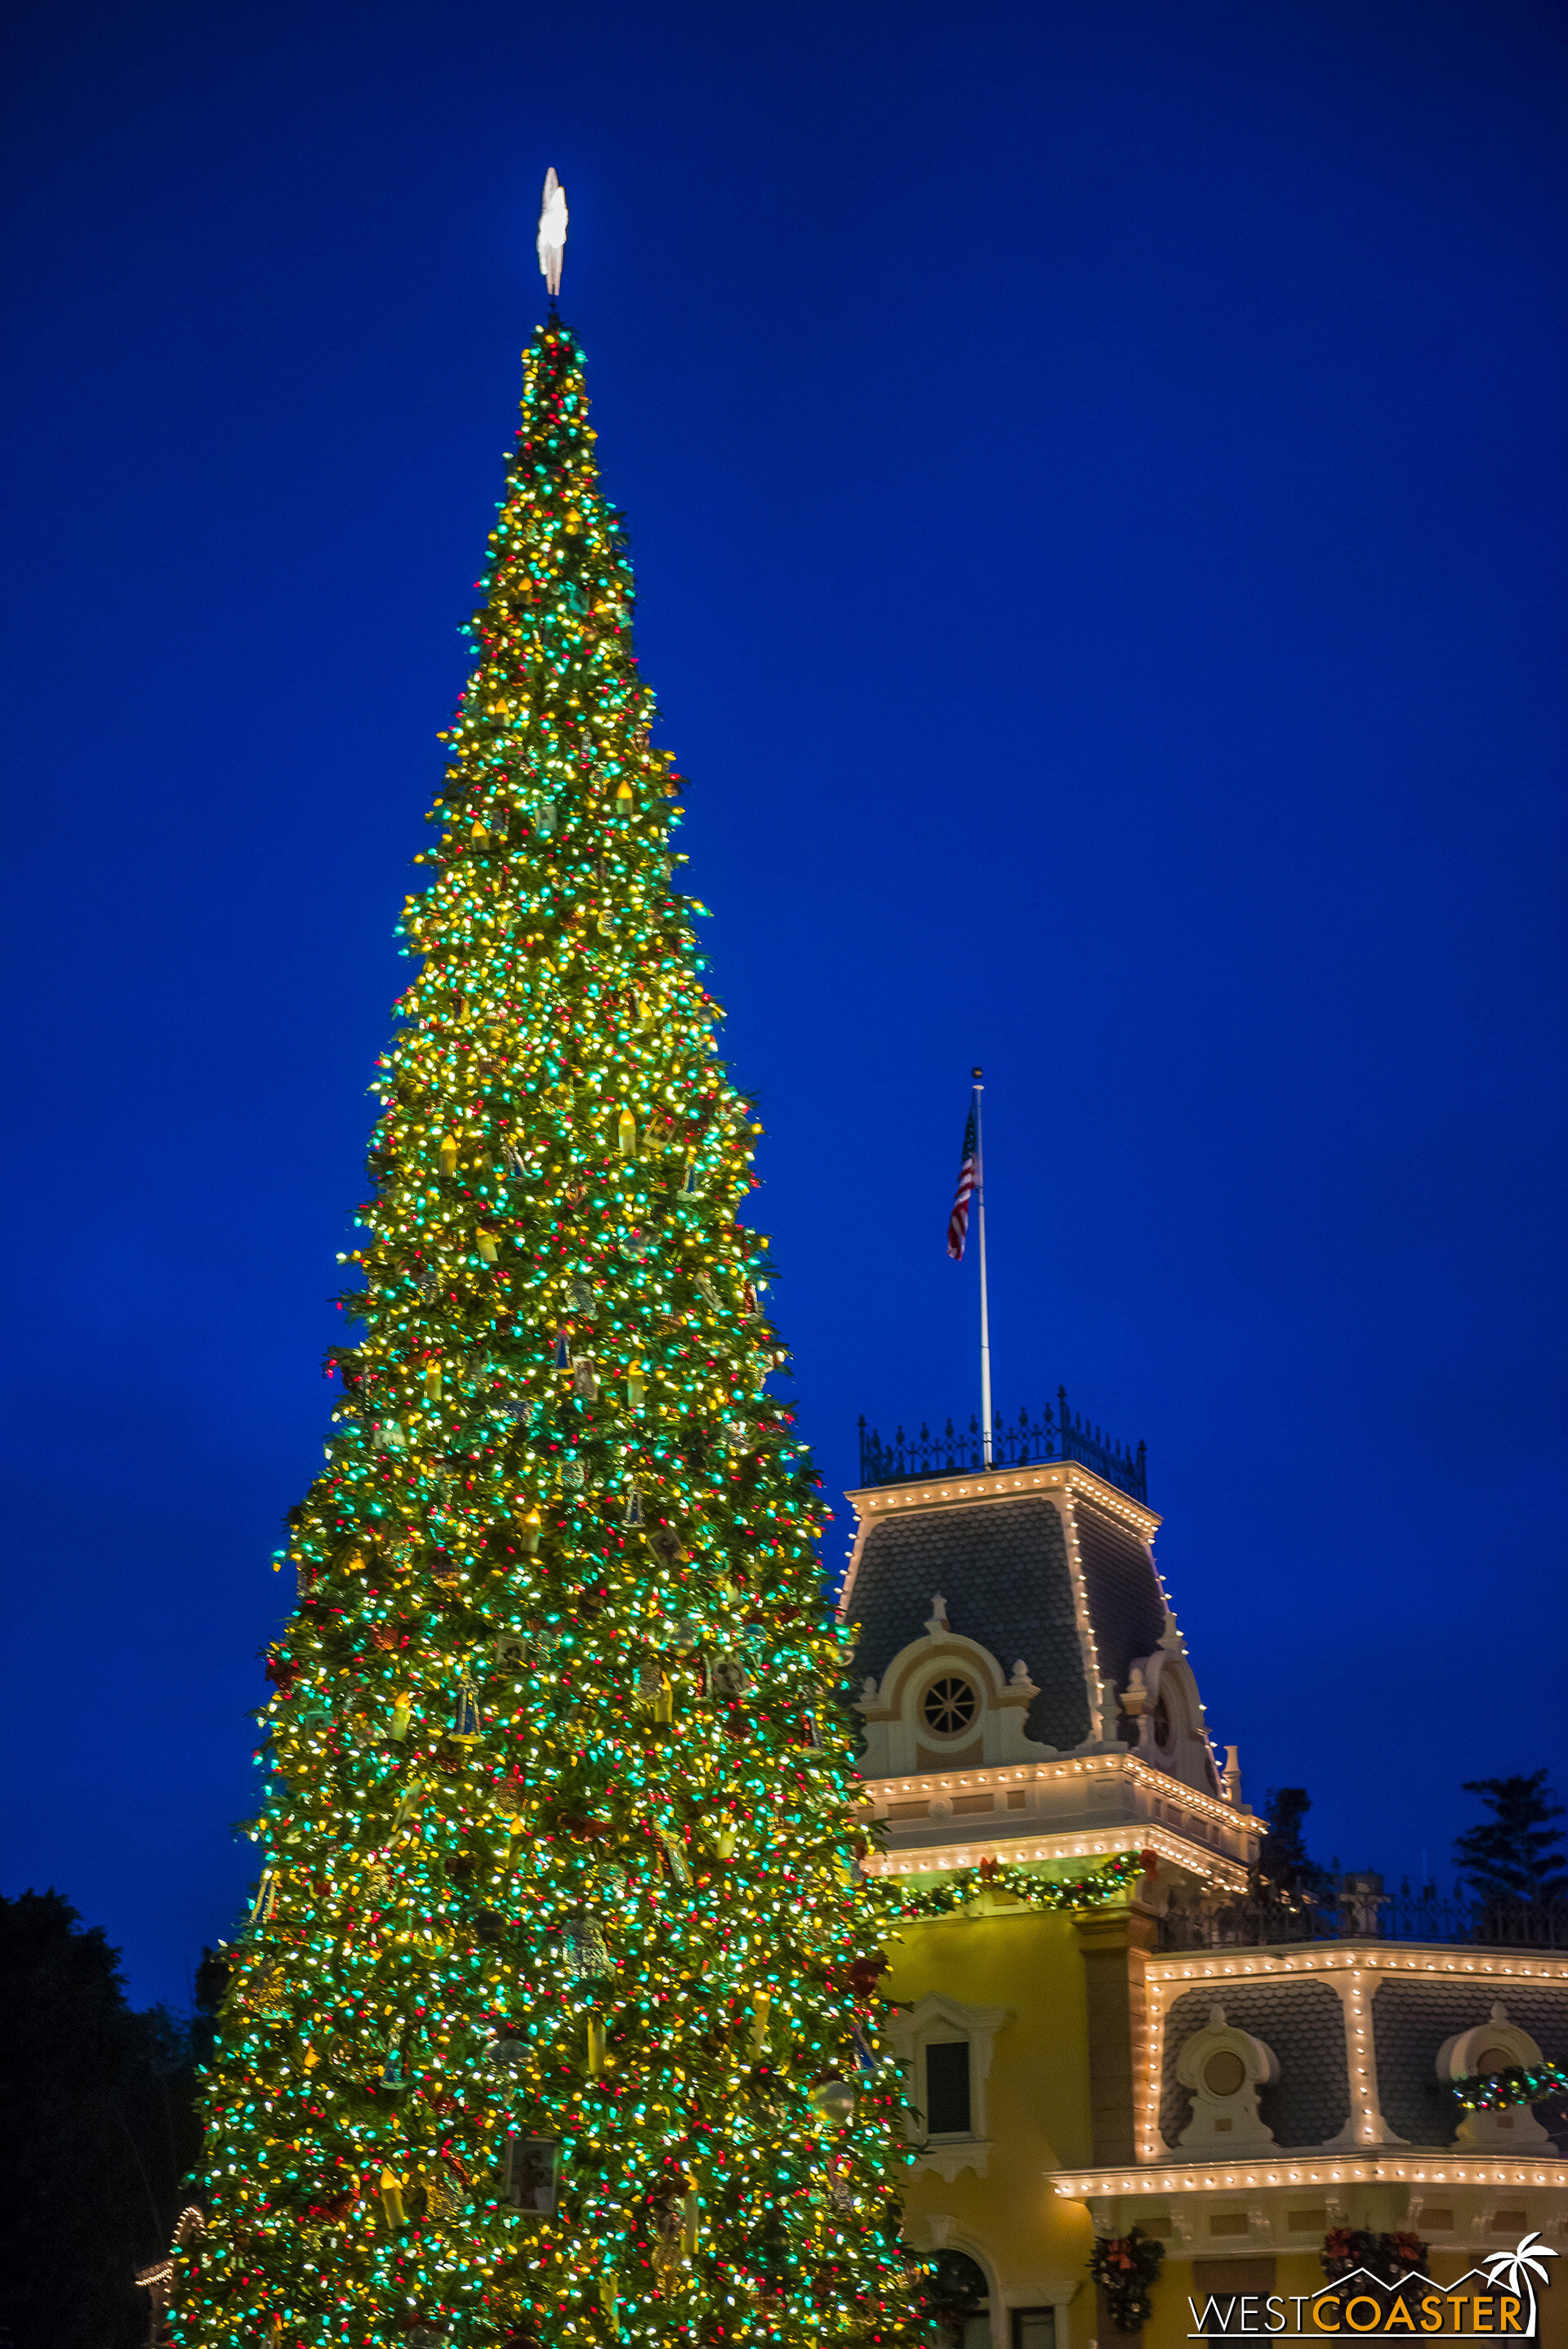  The towering Christmas tree sparkles during blue hour on Main Street! 